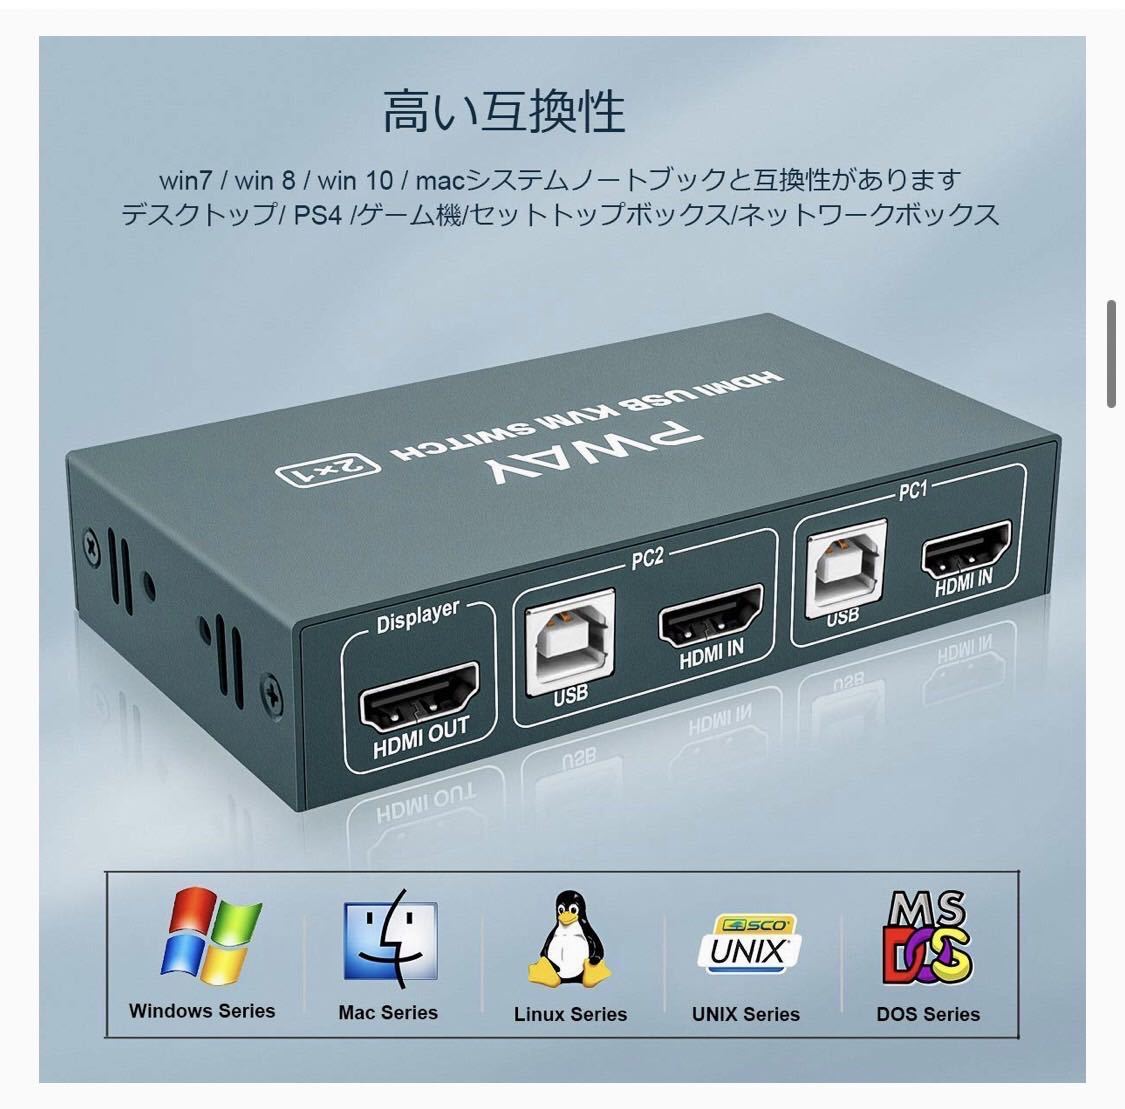 HDMI KVM Switch 2 in 1 out PC 切替器 AA0001 DVI-HDMI 変換ケーブル スイッチ ホットキースイッチング 電源不要